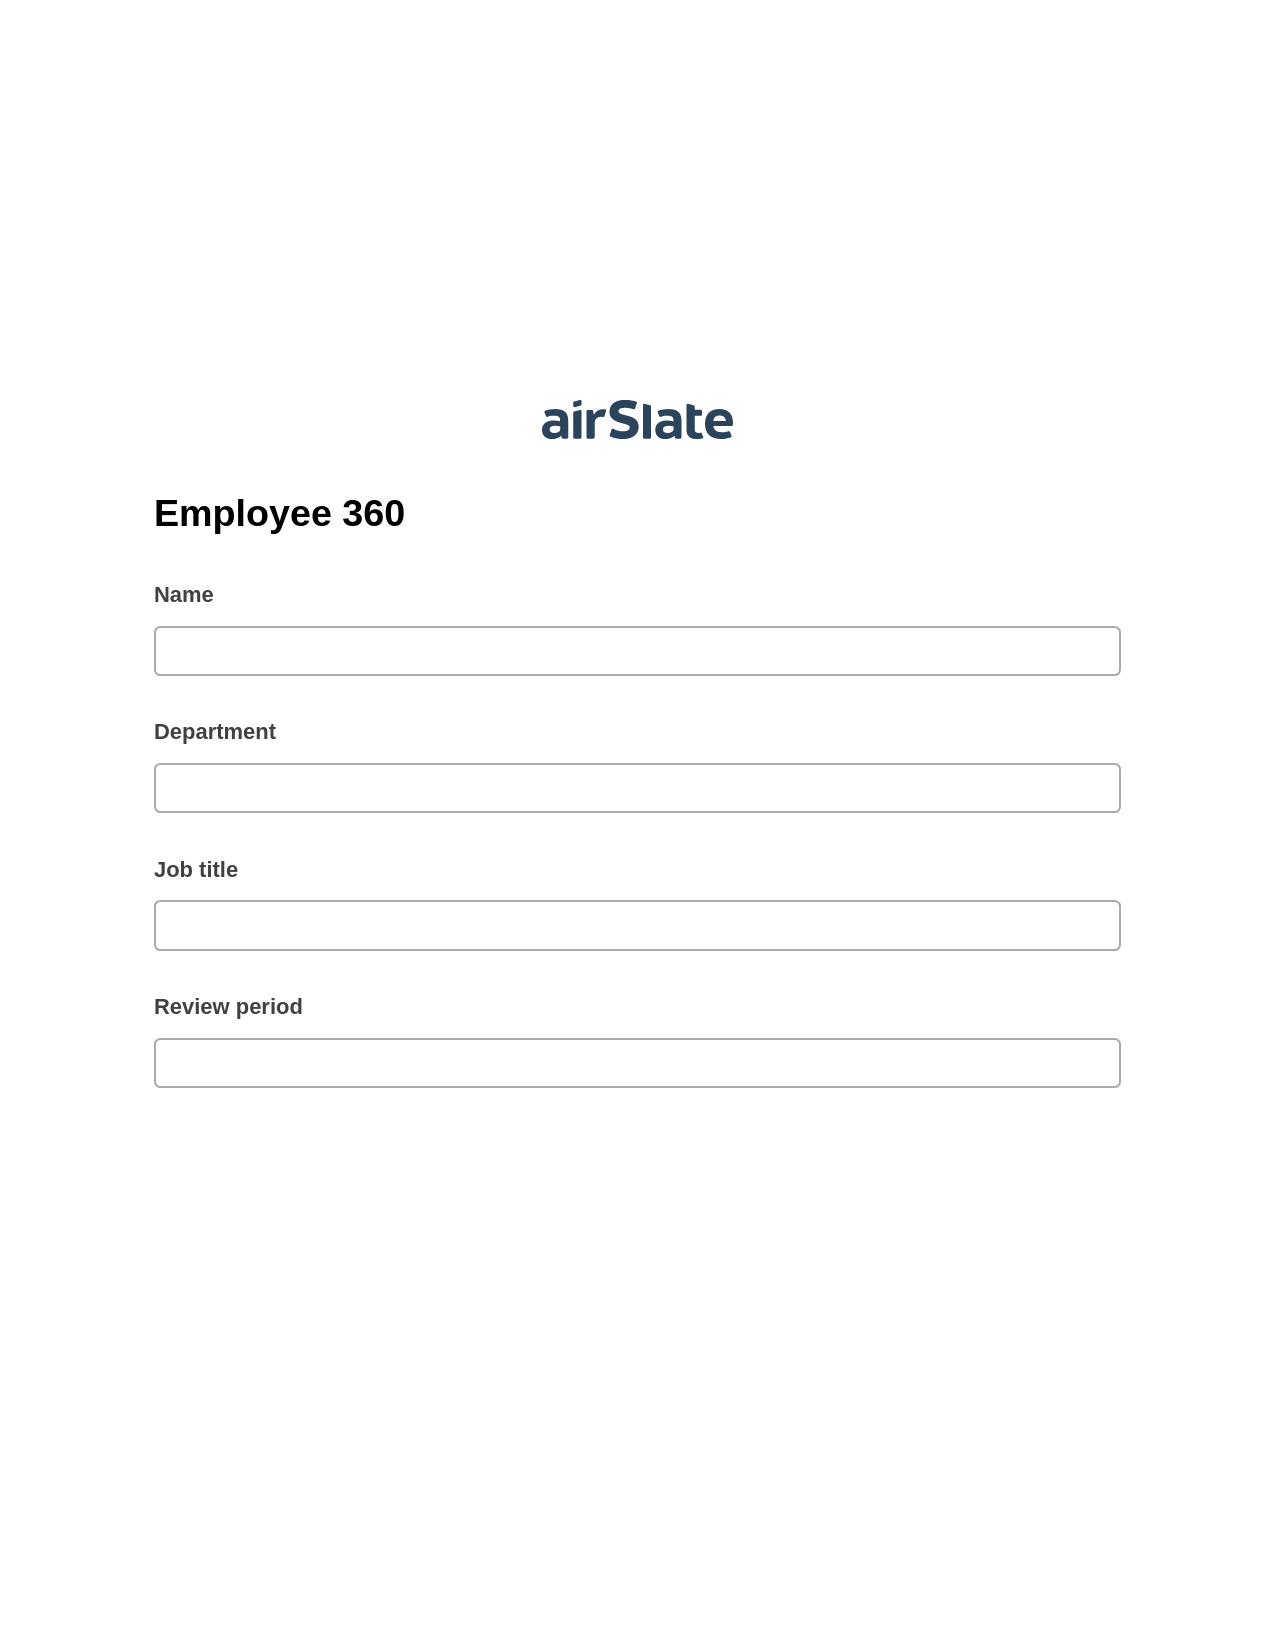 Employee 360 Prefill from NetSuite records, Roles Reminder Bot, Archive to OneDrive Bot